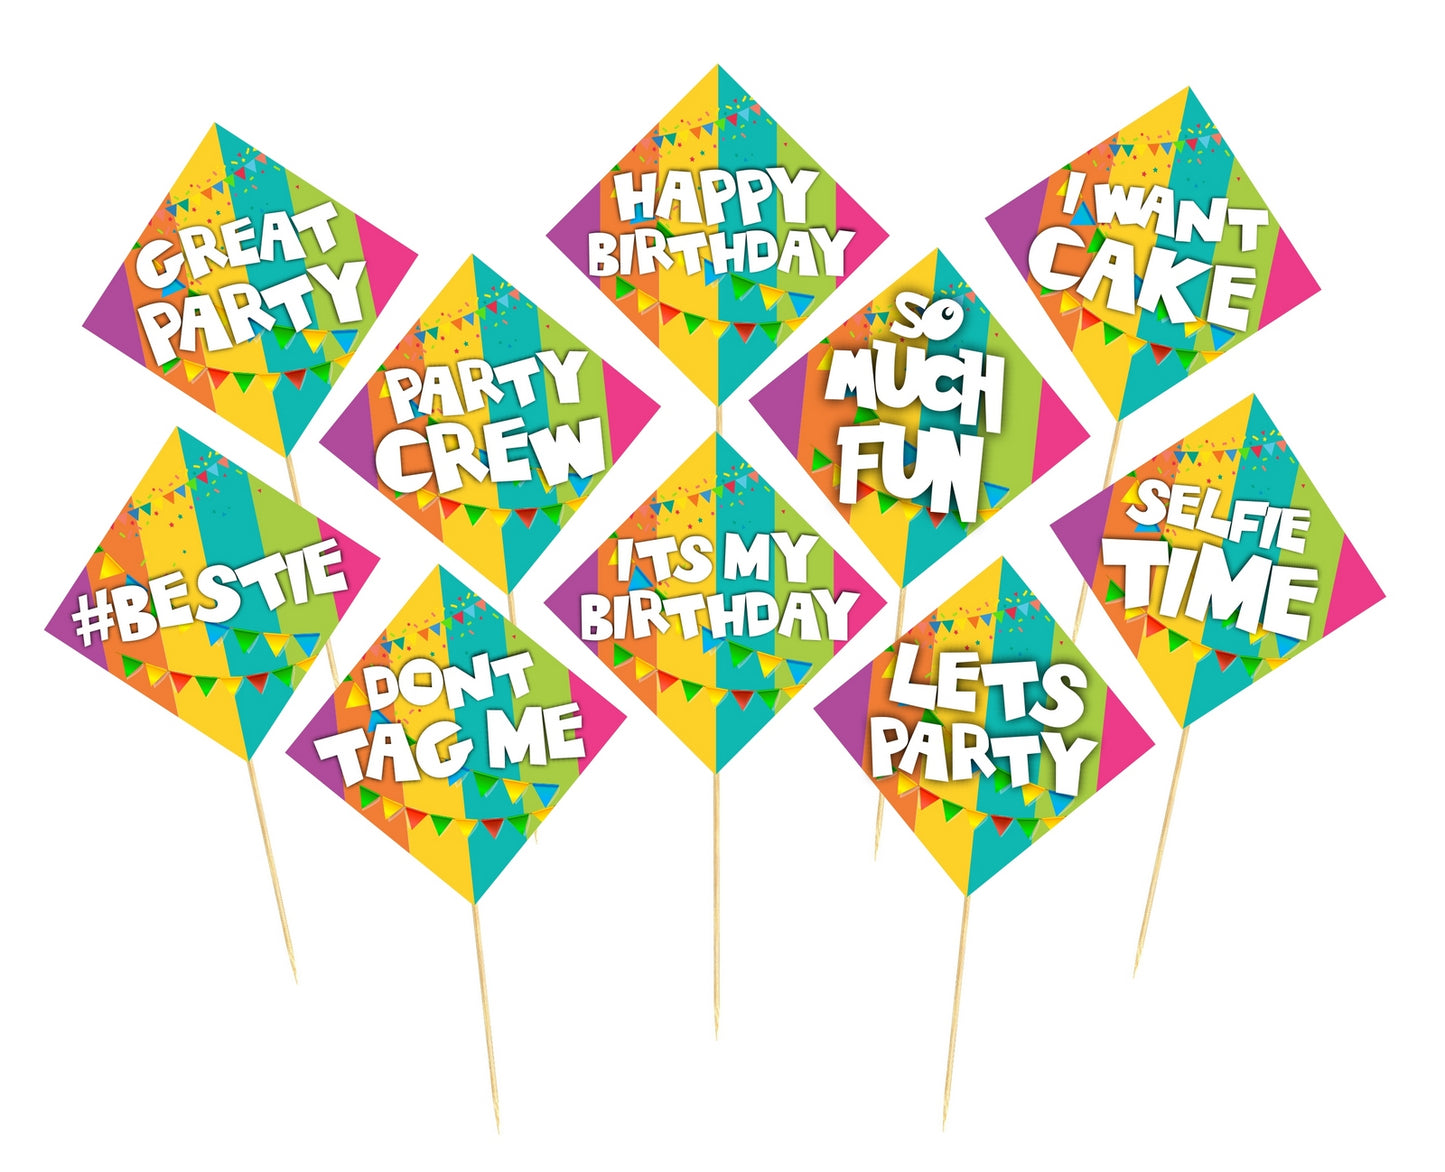 Happy Birthday Photo Booth Party Props Theme Birthday Party Decoration, Birthday Photo Booth Party Item for Adults and Kids